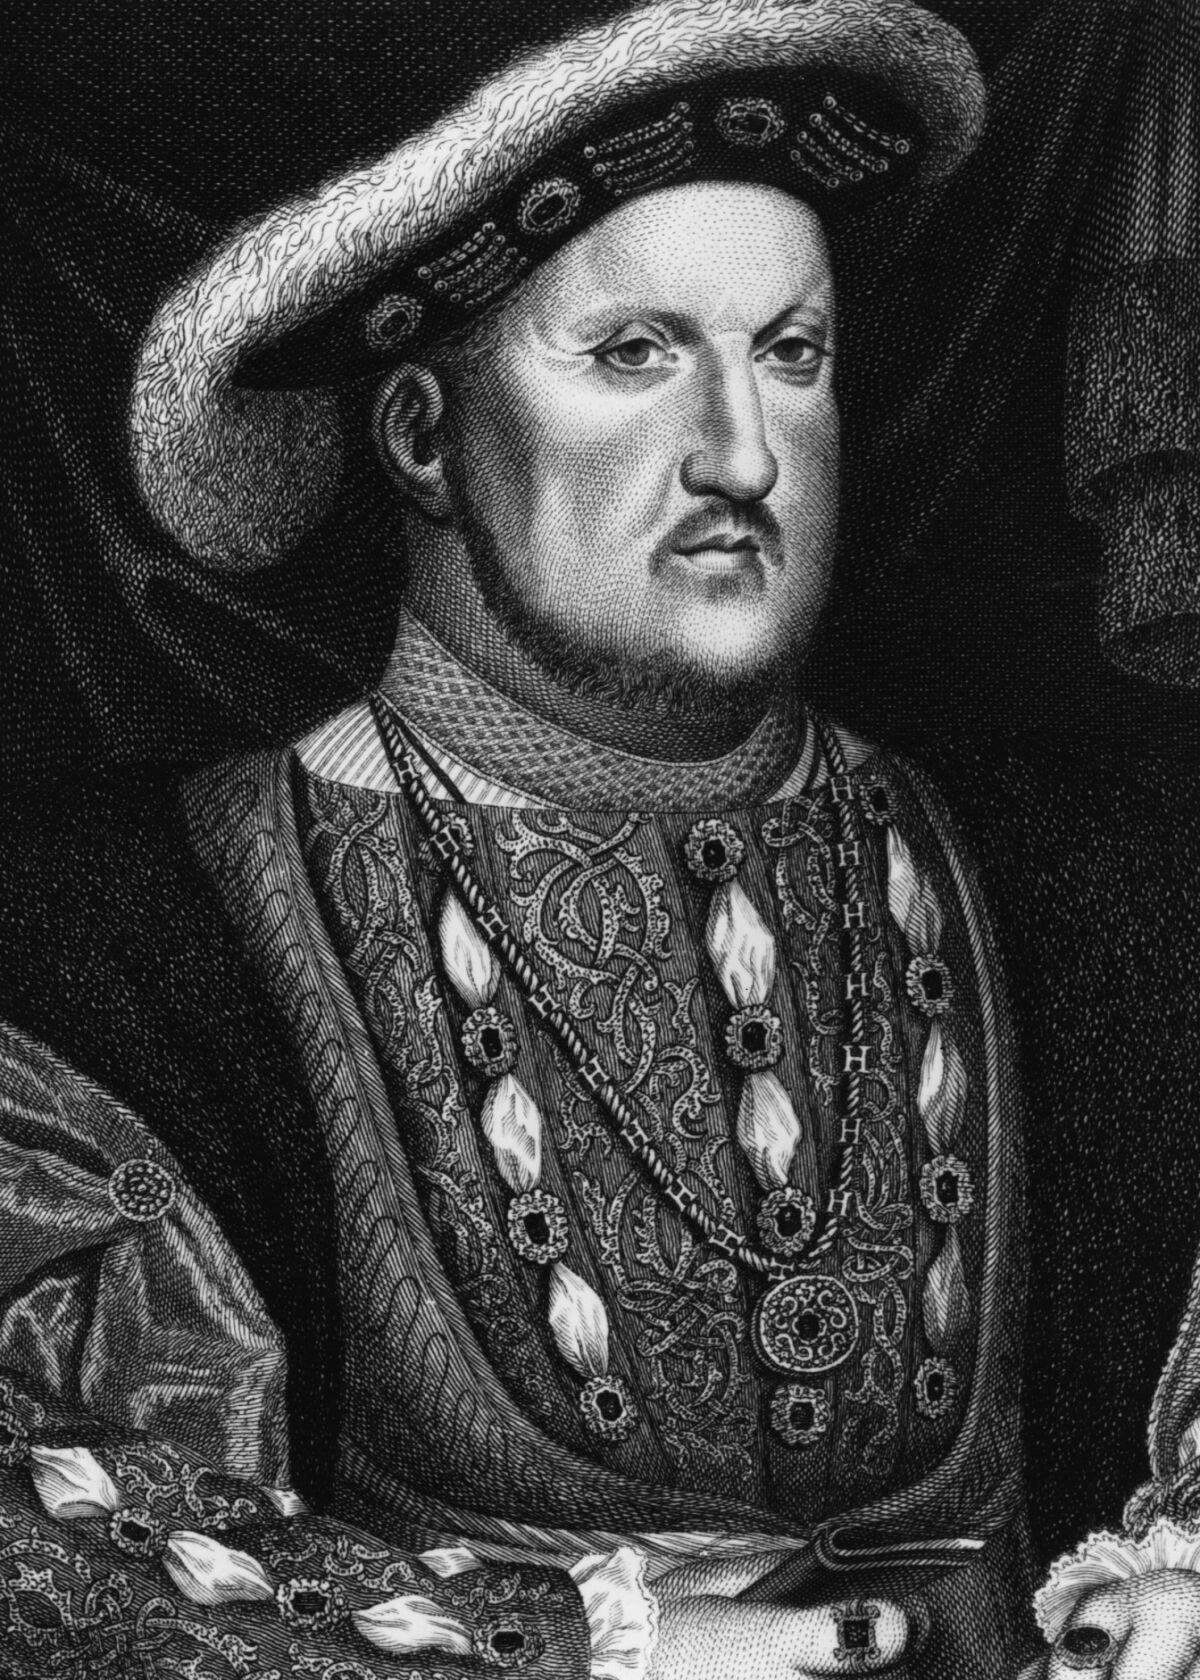 Circa 1540, a portrait of King Henry VIII (1491 - 1547).